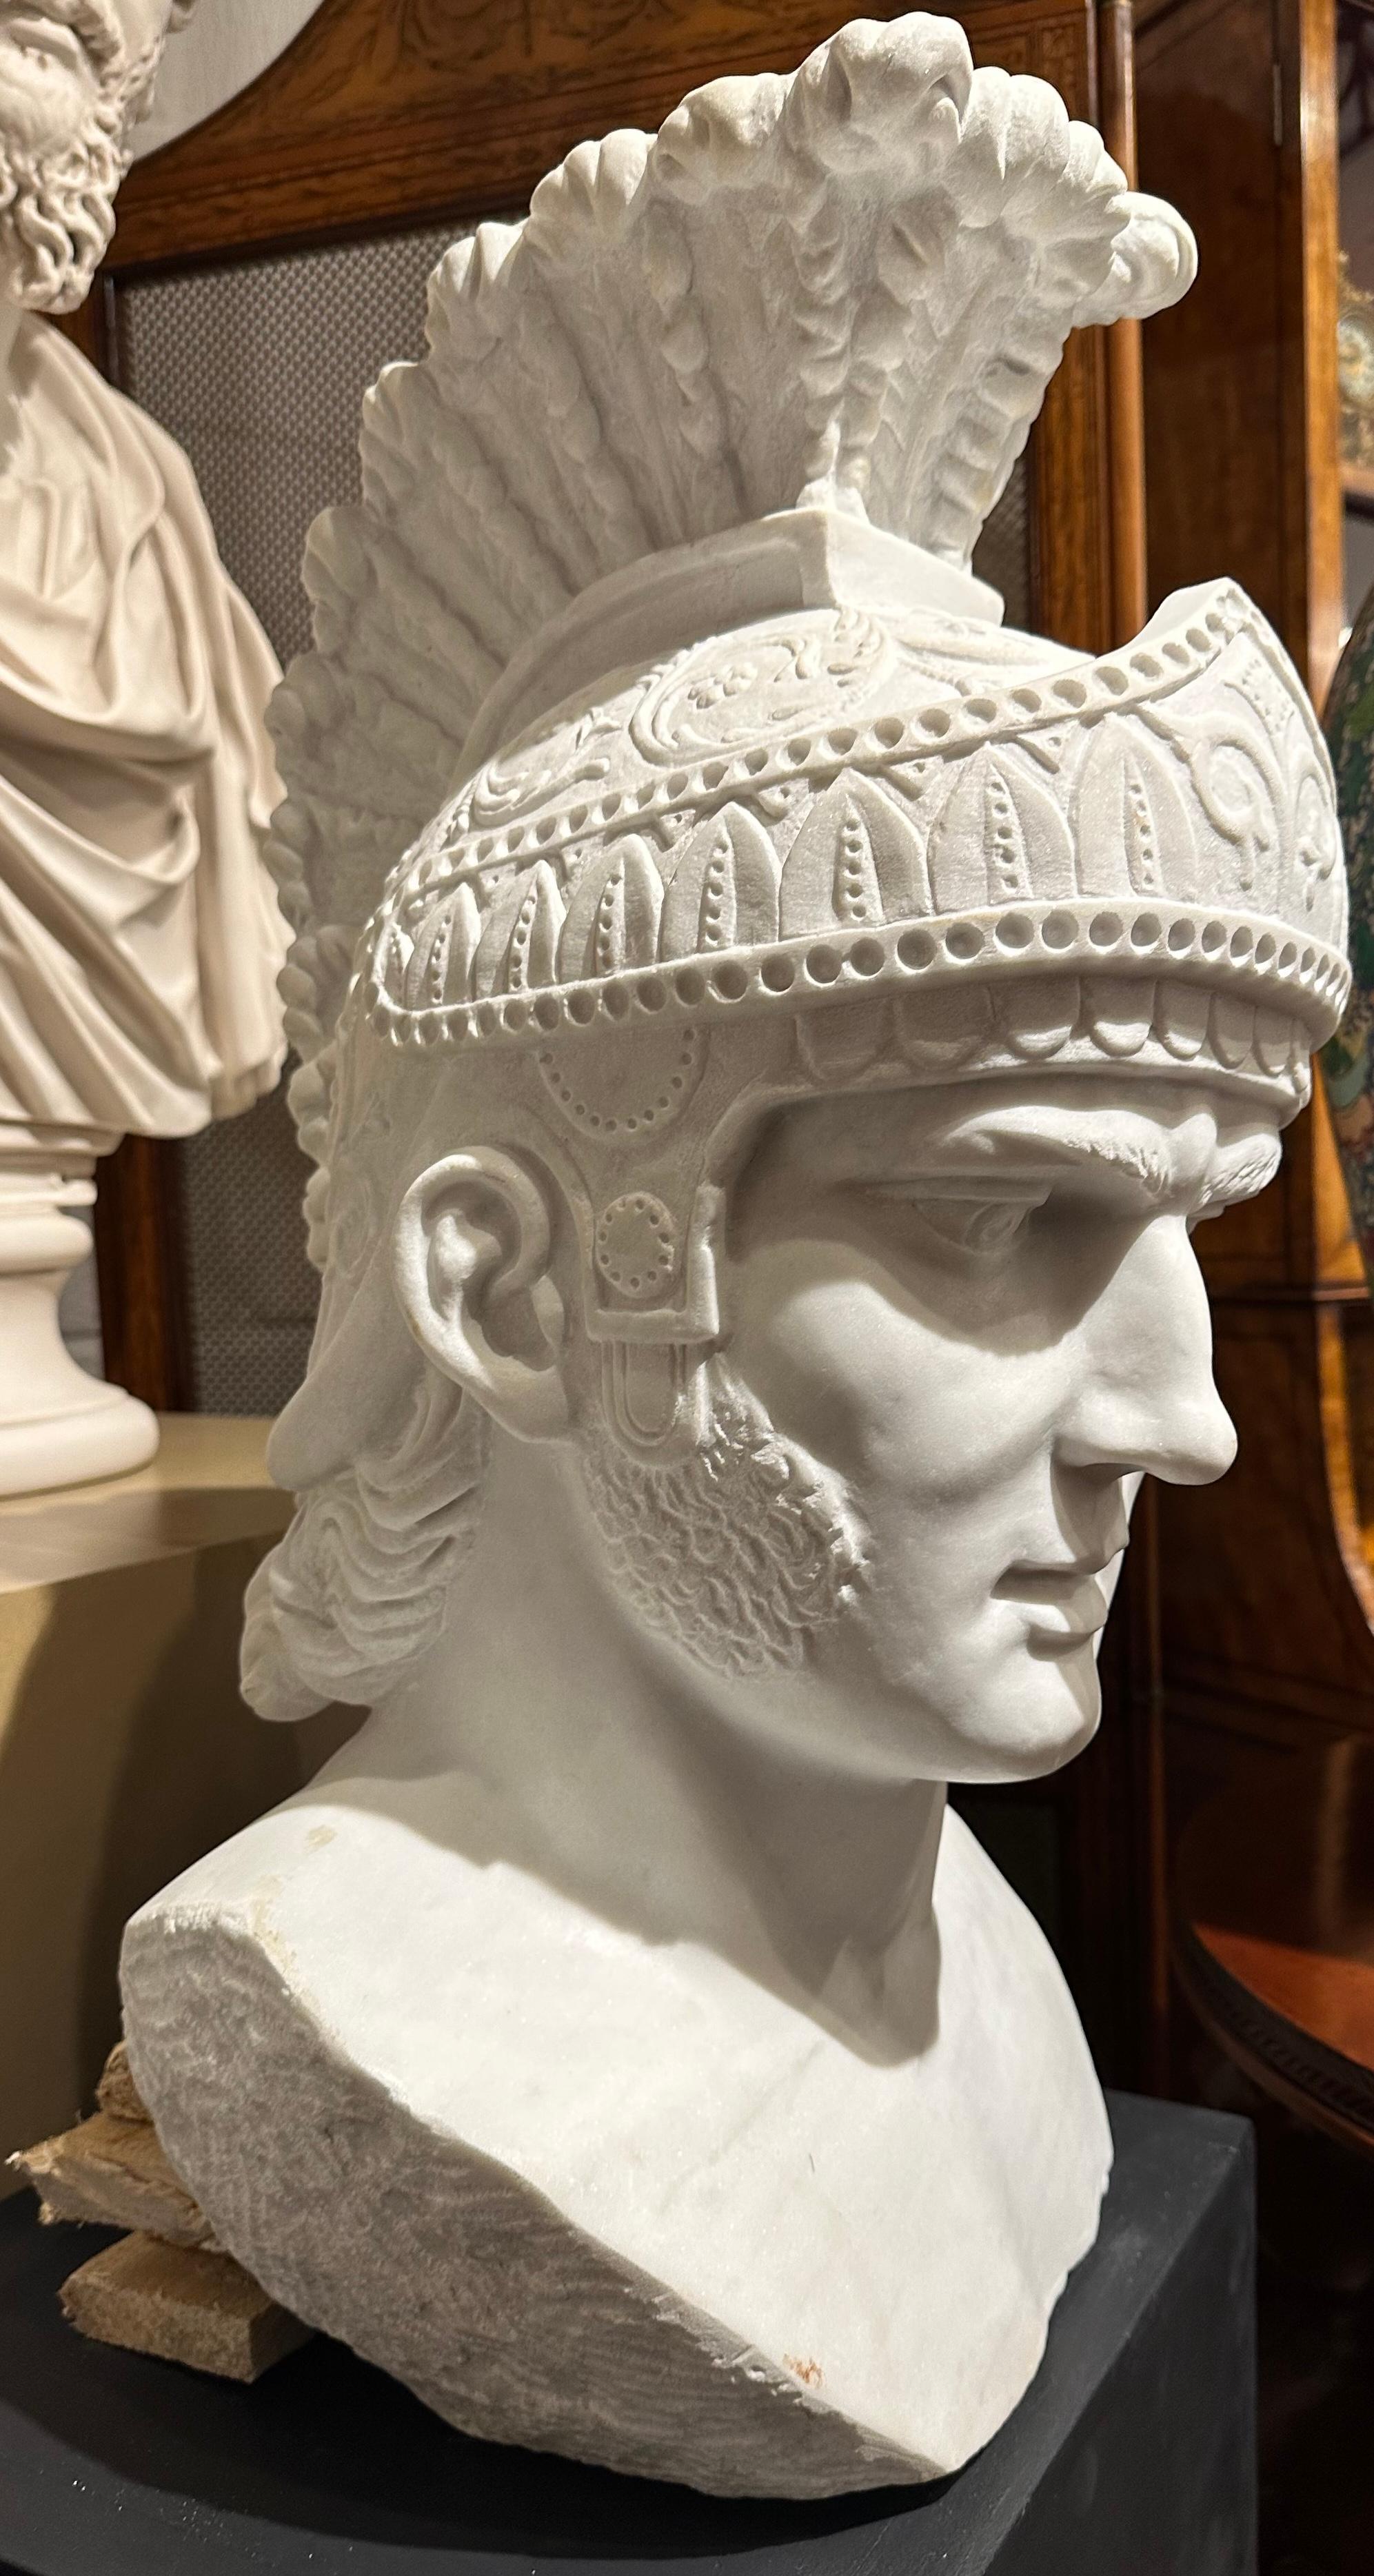 Exquisitely detailed carving of a Roman Bust with Helmet. The Males features are intricately carved with attention given to the shape of the nose and furrowed brow as he prepares to go into battle. The helmet is extremely elaborate with a folate